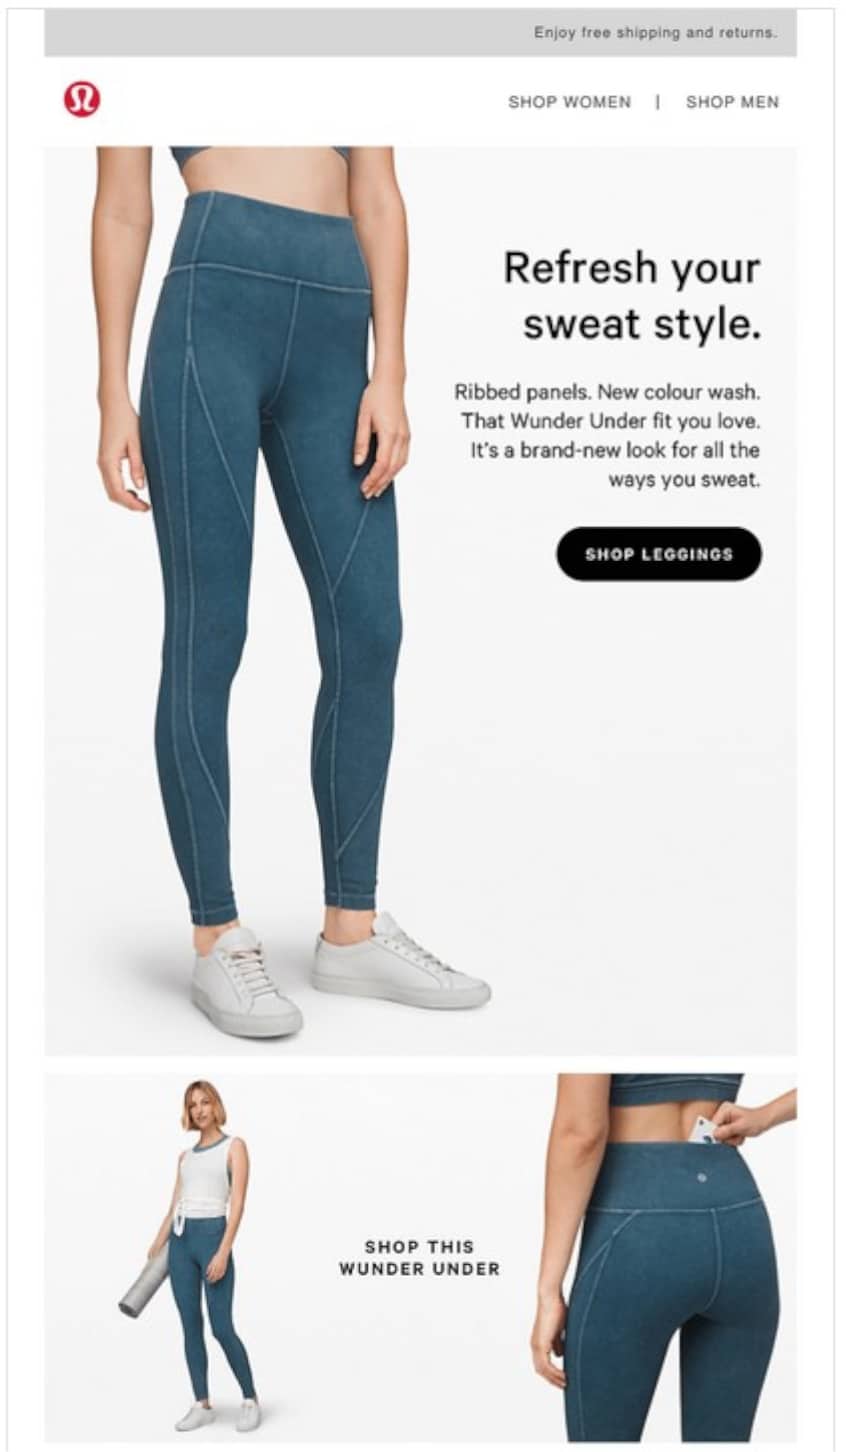  Lululemon brings back an old favorite with a product launch campaign.